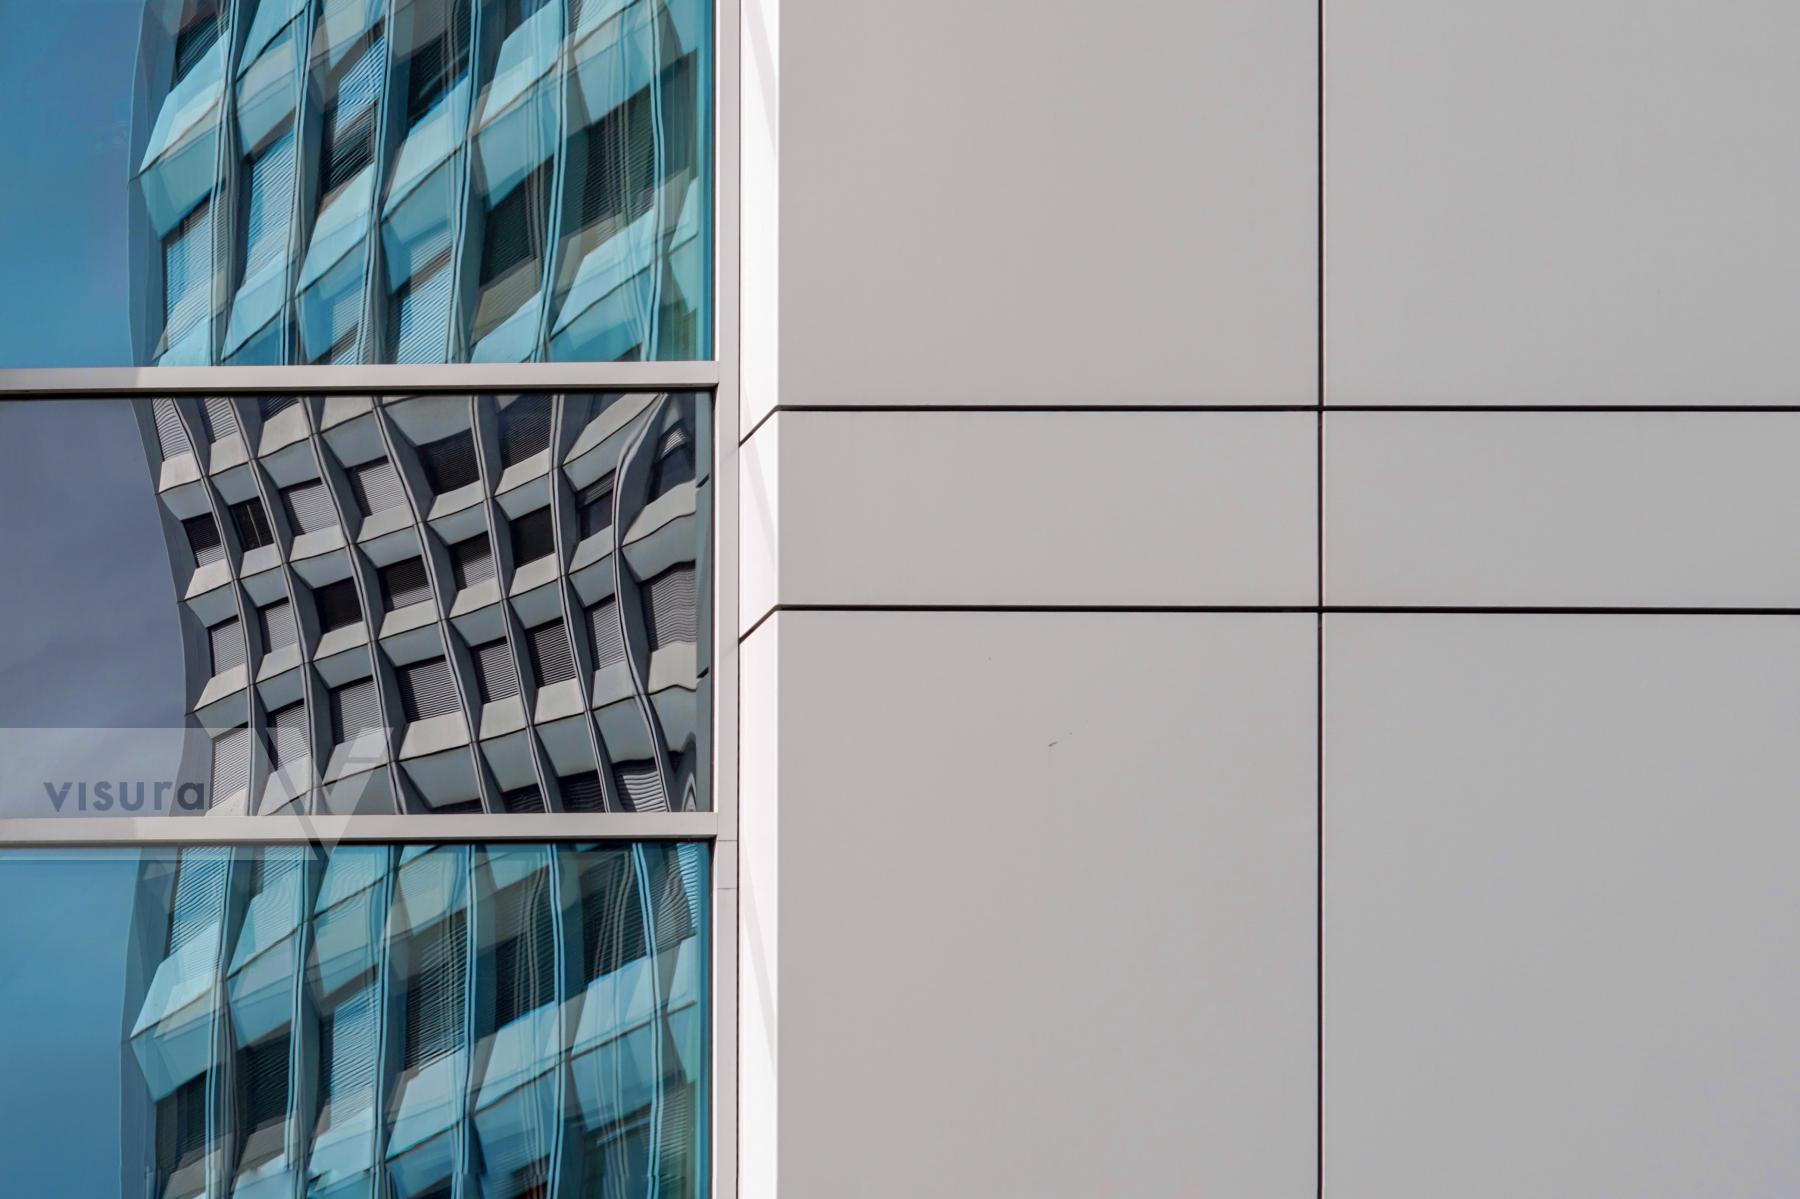 Purchase Urban Reflections: The Interplay between Urban Architecture and reflective Surfaces by Michael Nguyen